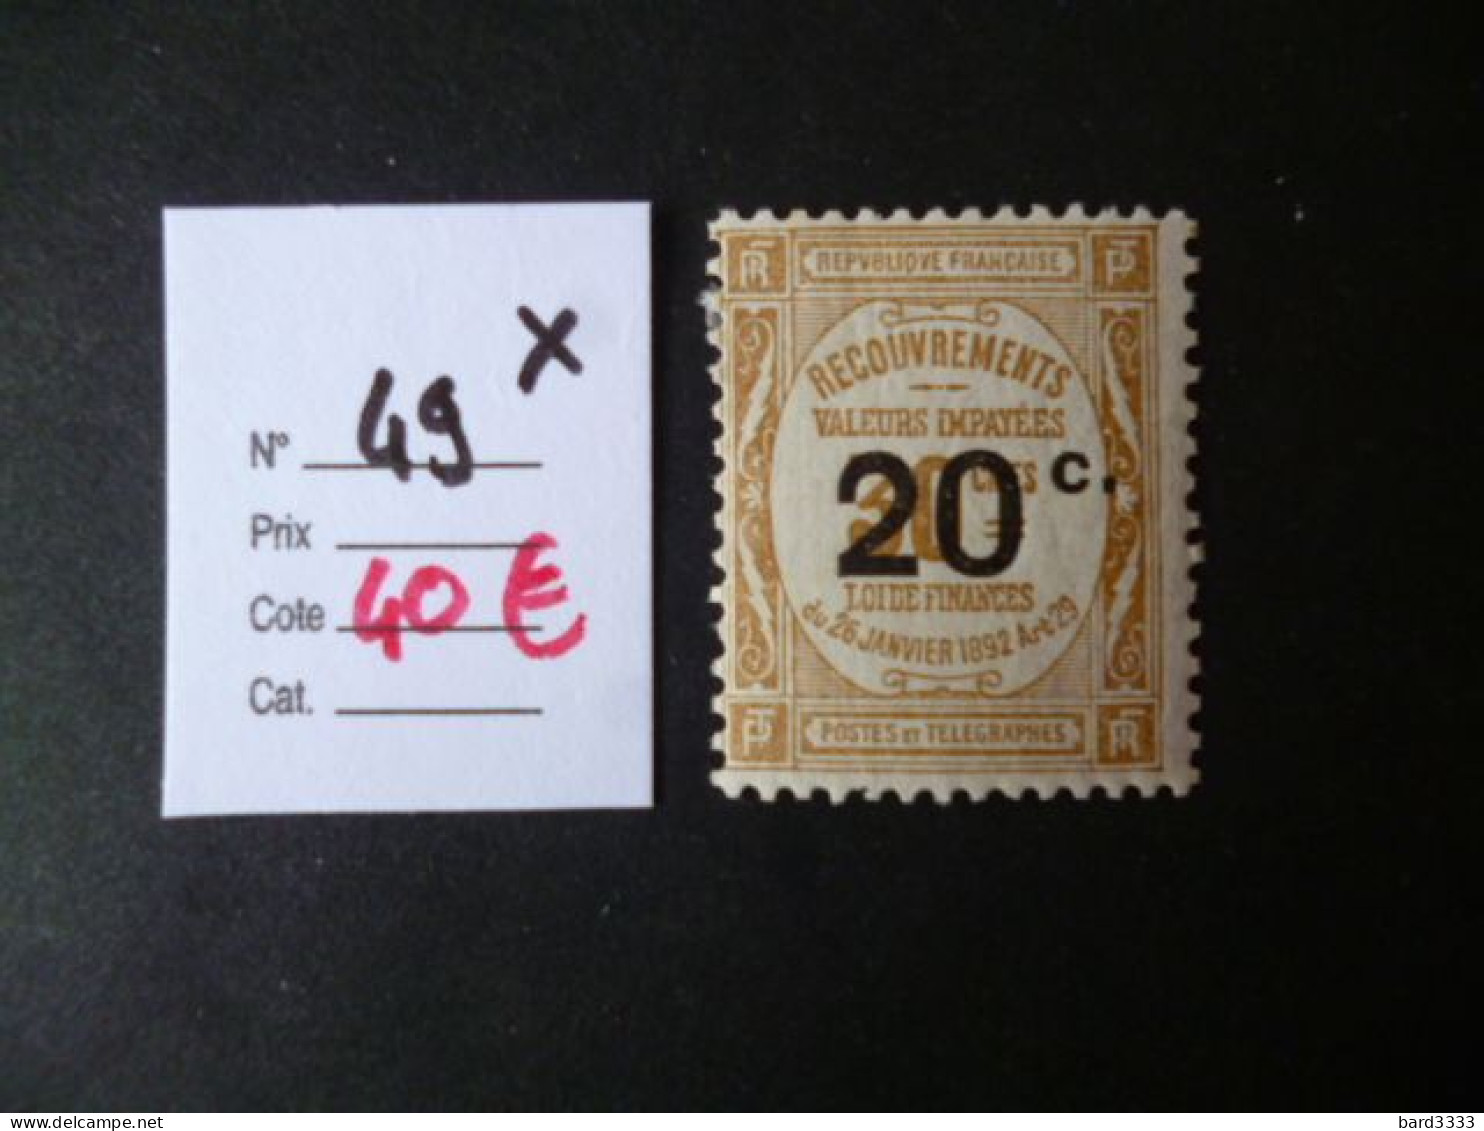 Timbre France Neuf * Taxe N° 49 Cote 40 € - 1859-1959 Nuovi